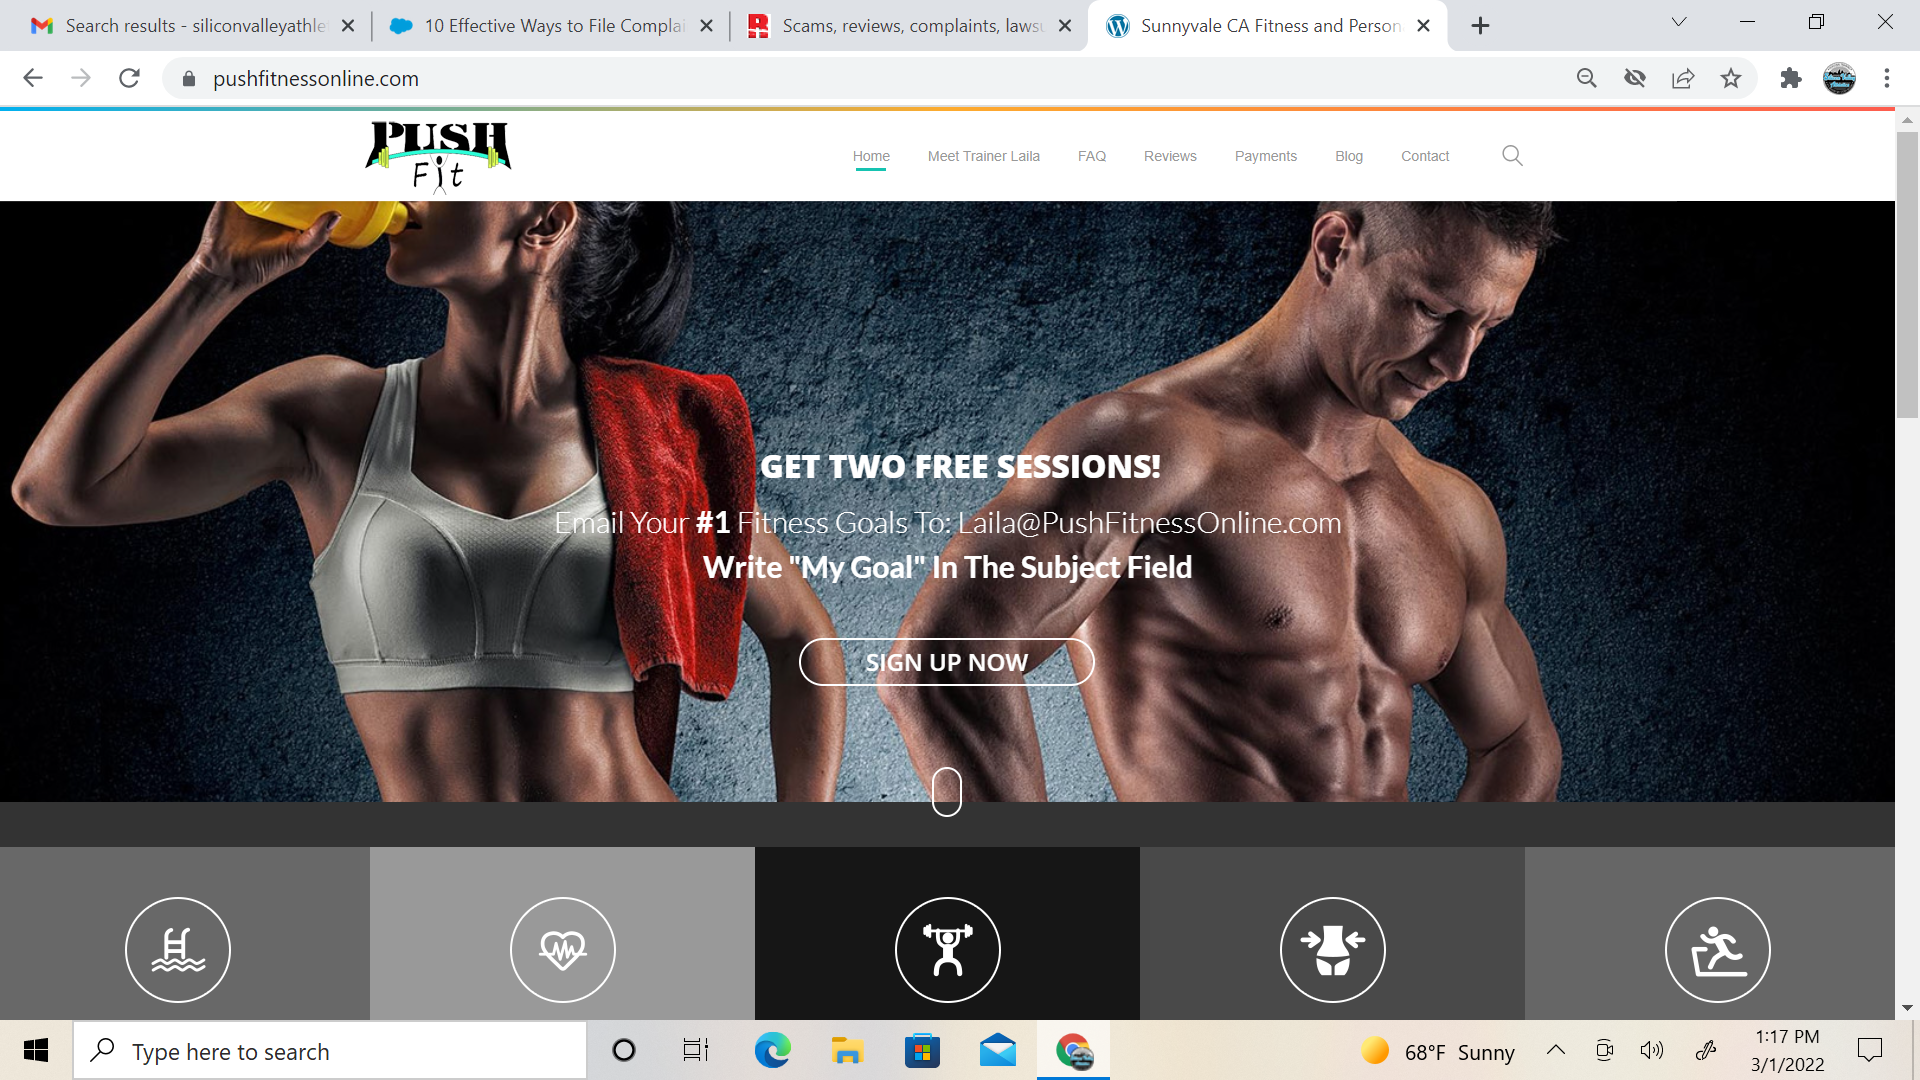 Push Fitness copied our site and content